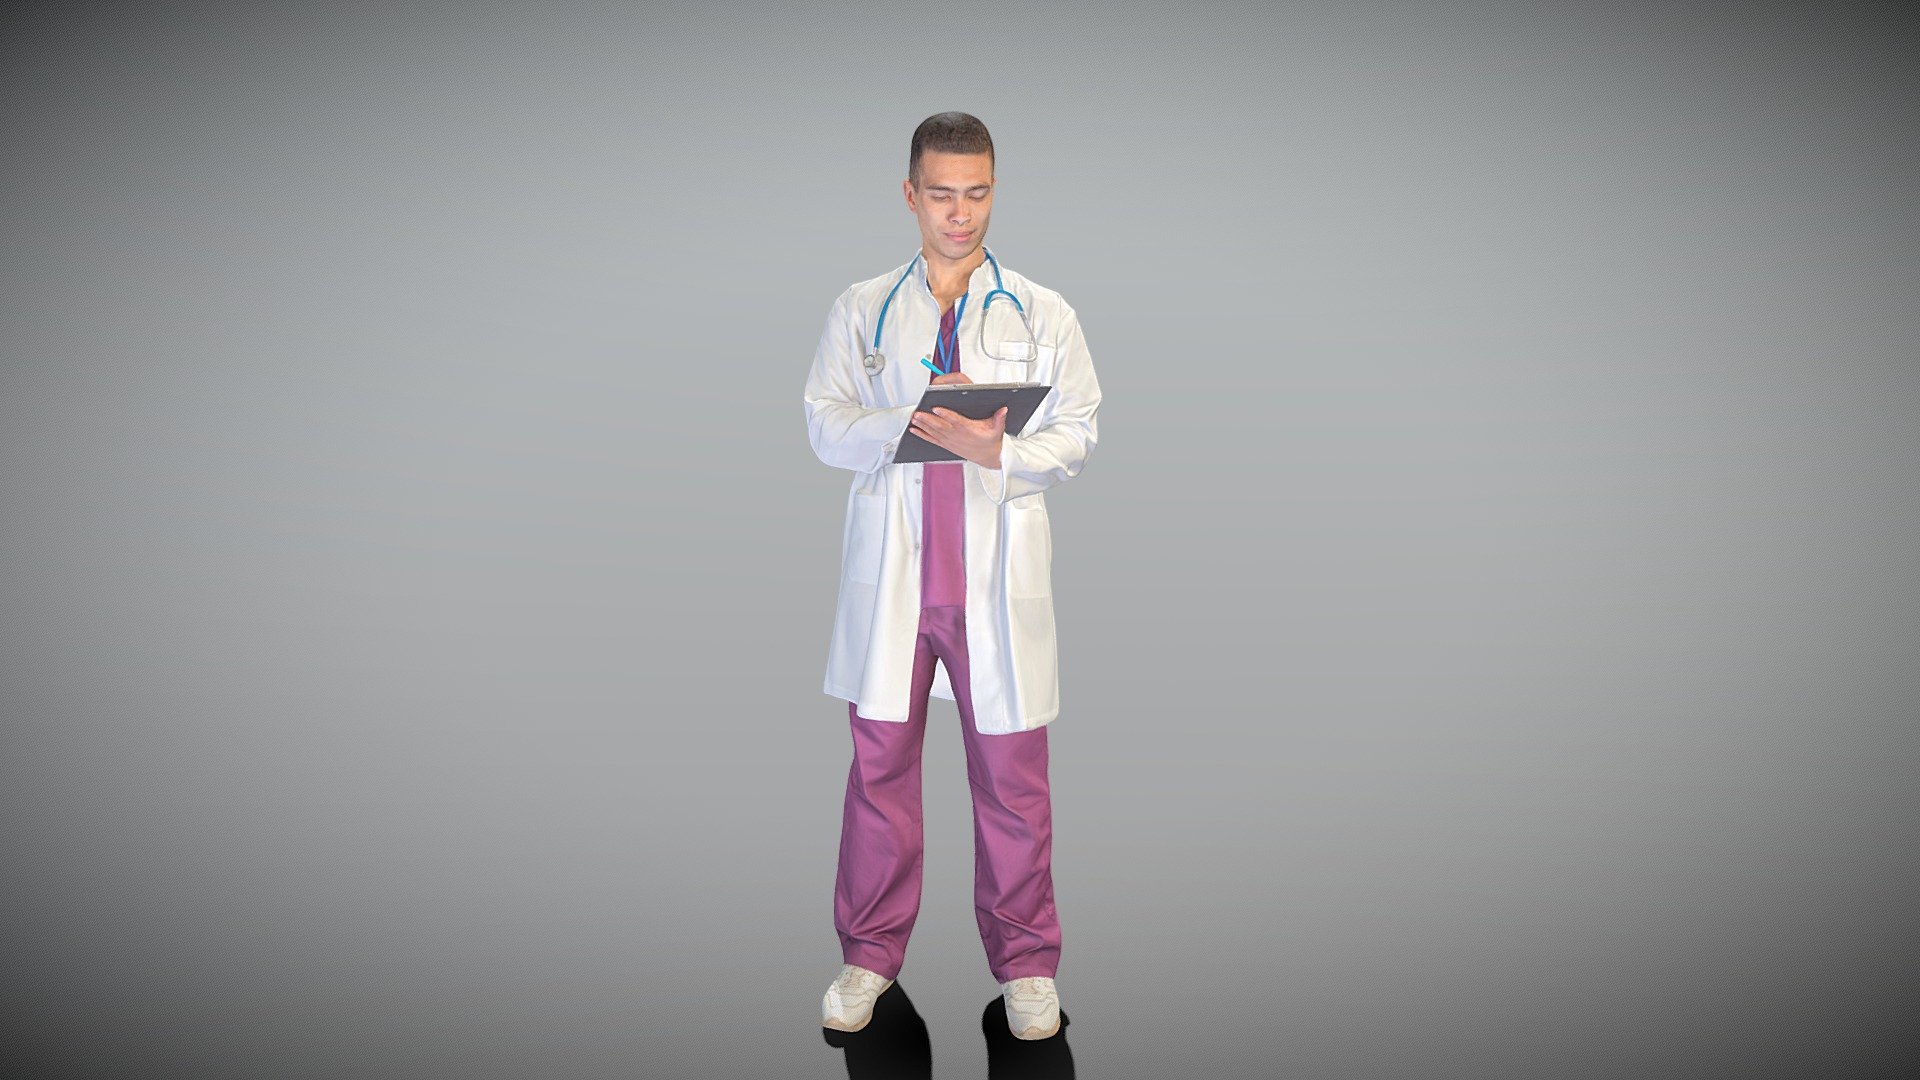 This is a true human size and detailed model of a handsome man of Caucasian appearance dressed in a medical uniform. The model is captured in typical professional pose to perfectly match a variety of architectural and product visualizations, be used as a background or mid-sized character in advert banners, professional products/devices presentations, educational tutorials, VR/AR content, etc.

Technical specifications:




digital double 3d scan model

150k &amp; 30k triangles | double triangulated

high-poly model (.ztl tool with 5 subdivisions) clean and retopologized automatically via ZRemesher

sufficiently clean

PBR textures 8K resolution: Diffuse, Normal, Specular maps

non-overlapping UV map

no extra plugins are required for this model

Download package includes a Cinema 4D project file with Redshift shader, OBJ, FBX, STL files, which are applicable for 3ds Max, Maya, Unreal Engine, Unity, Blender, etc.

3D EVERYTHING

Stand with Ukraine! - Male doctor standing with folder 419 - Buy Royalty Free 3D model by deep3dstudio 3d model